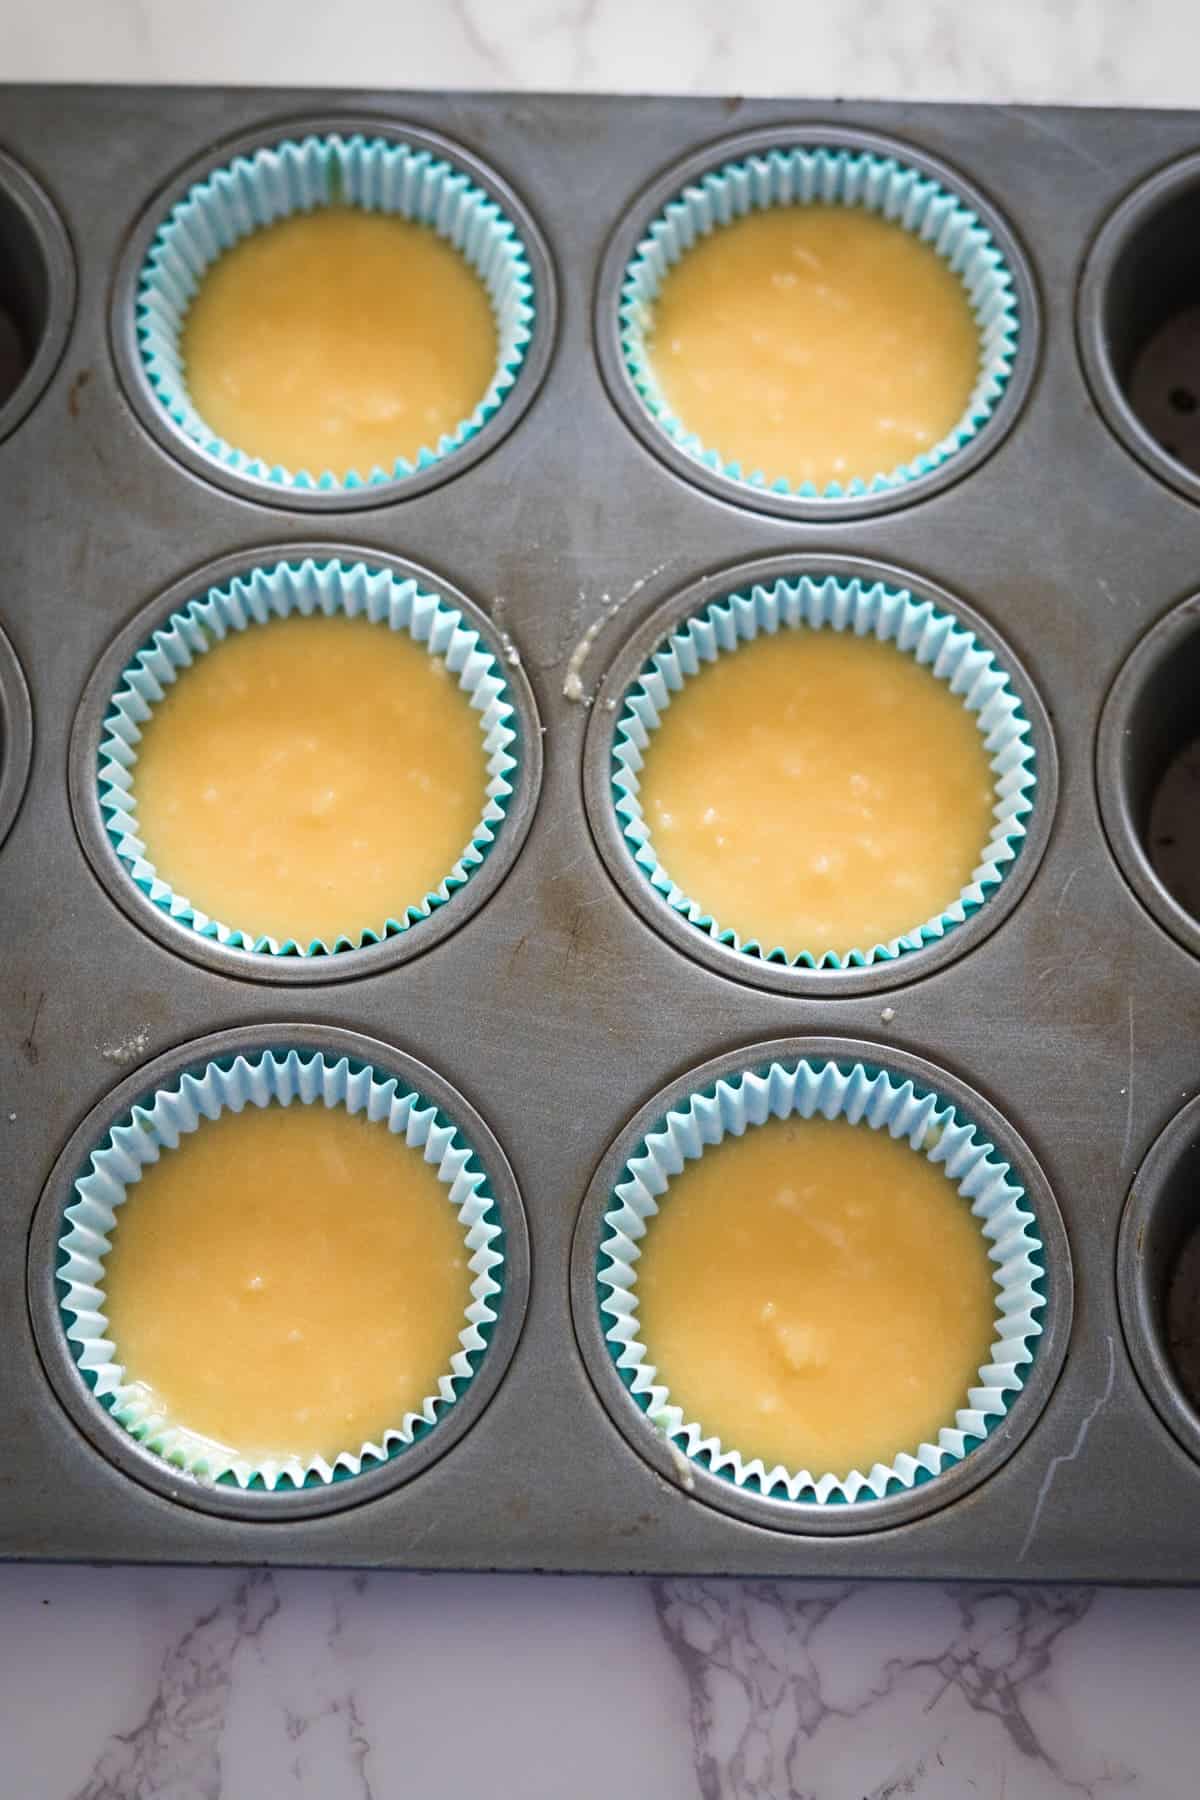 A muffin tin filled with yellow keto cupcakes.